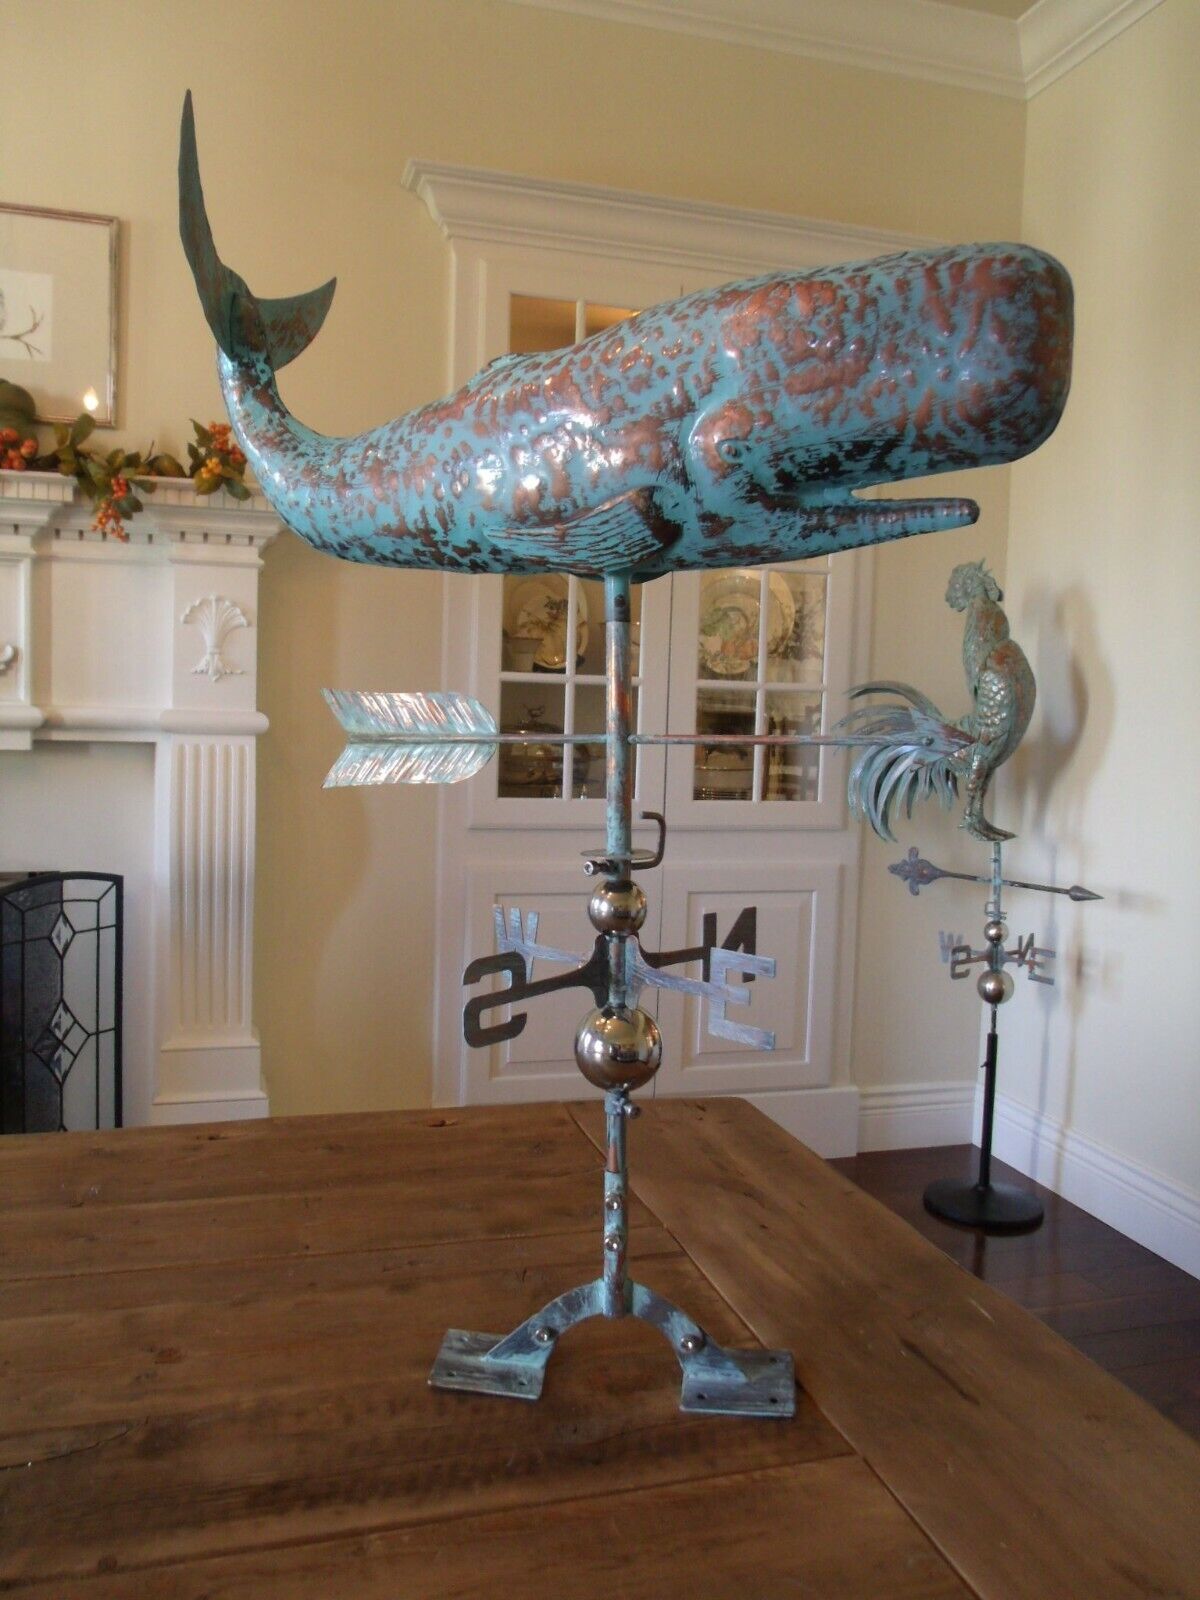  LARGE Handcrafted 3D 3-Dimensional WHALE Weathervane Copper Patina Finish